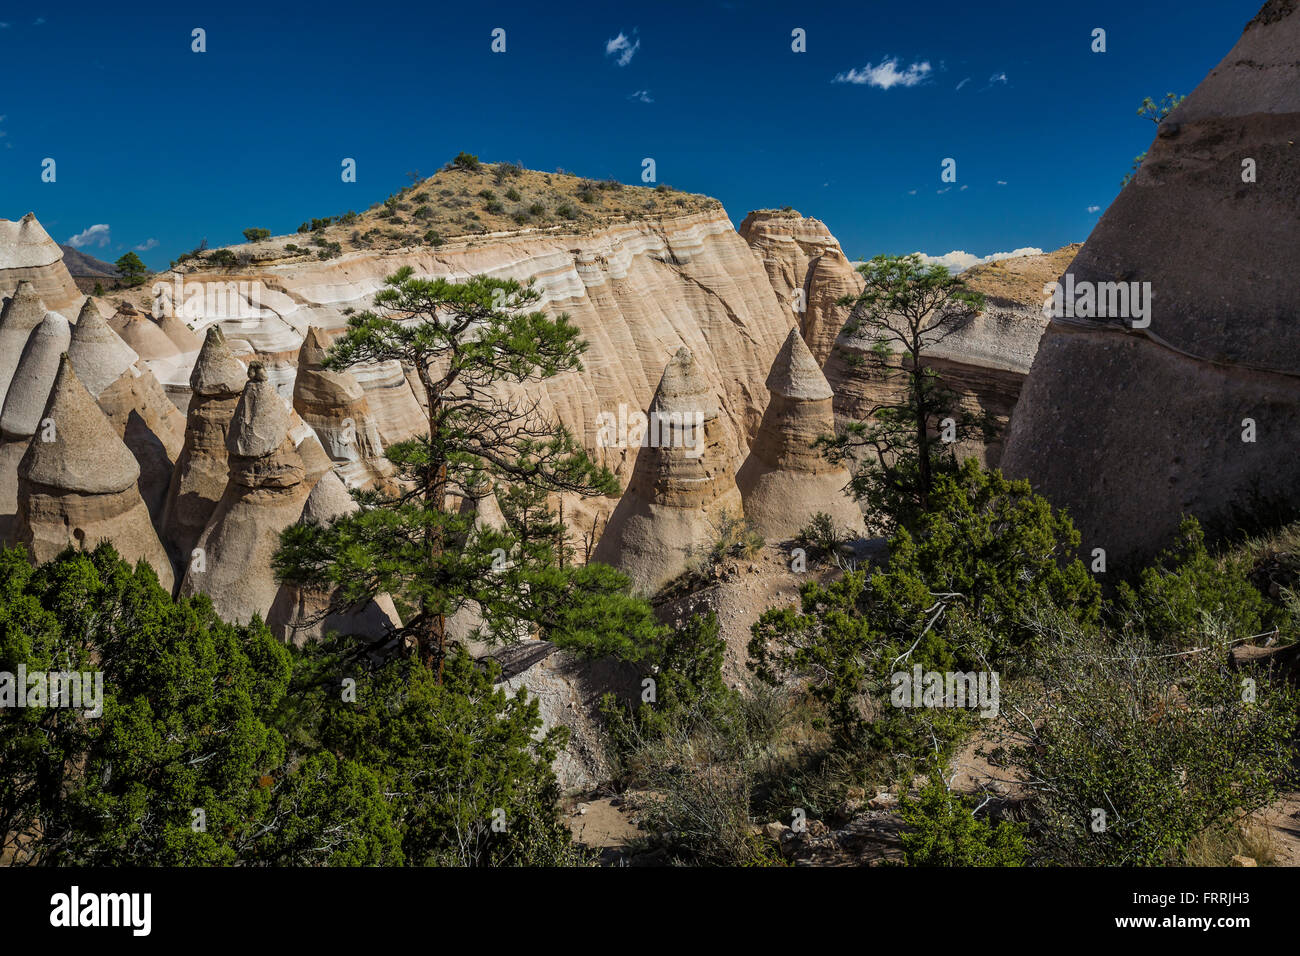 Landscape of cliffs and canyons viewed from the Slot Canyon Trail at Kasha-Katuwe Tent Rocks National Monument, New Mexico, USA Stock Photo